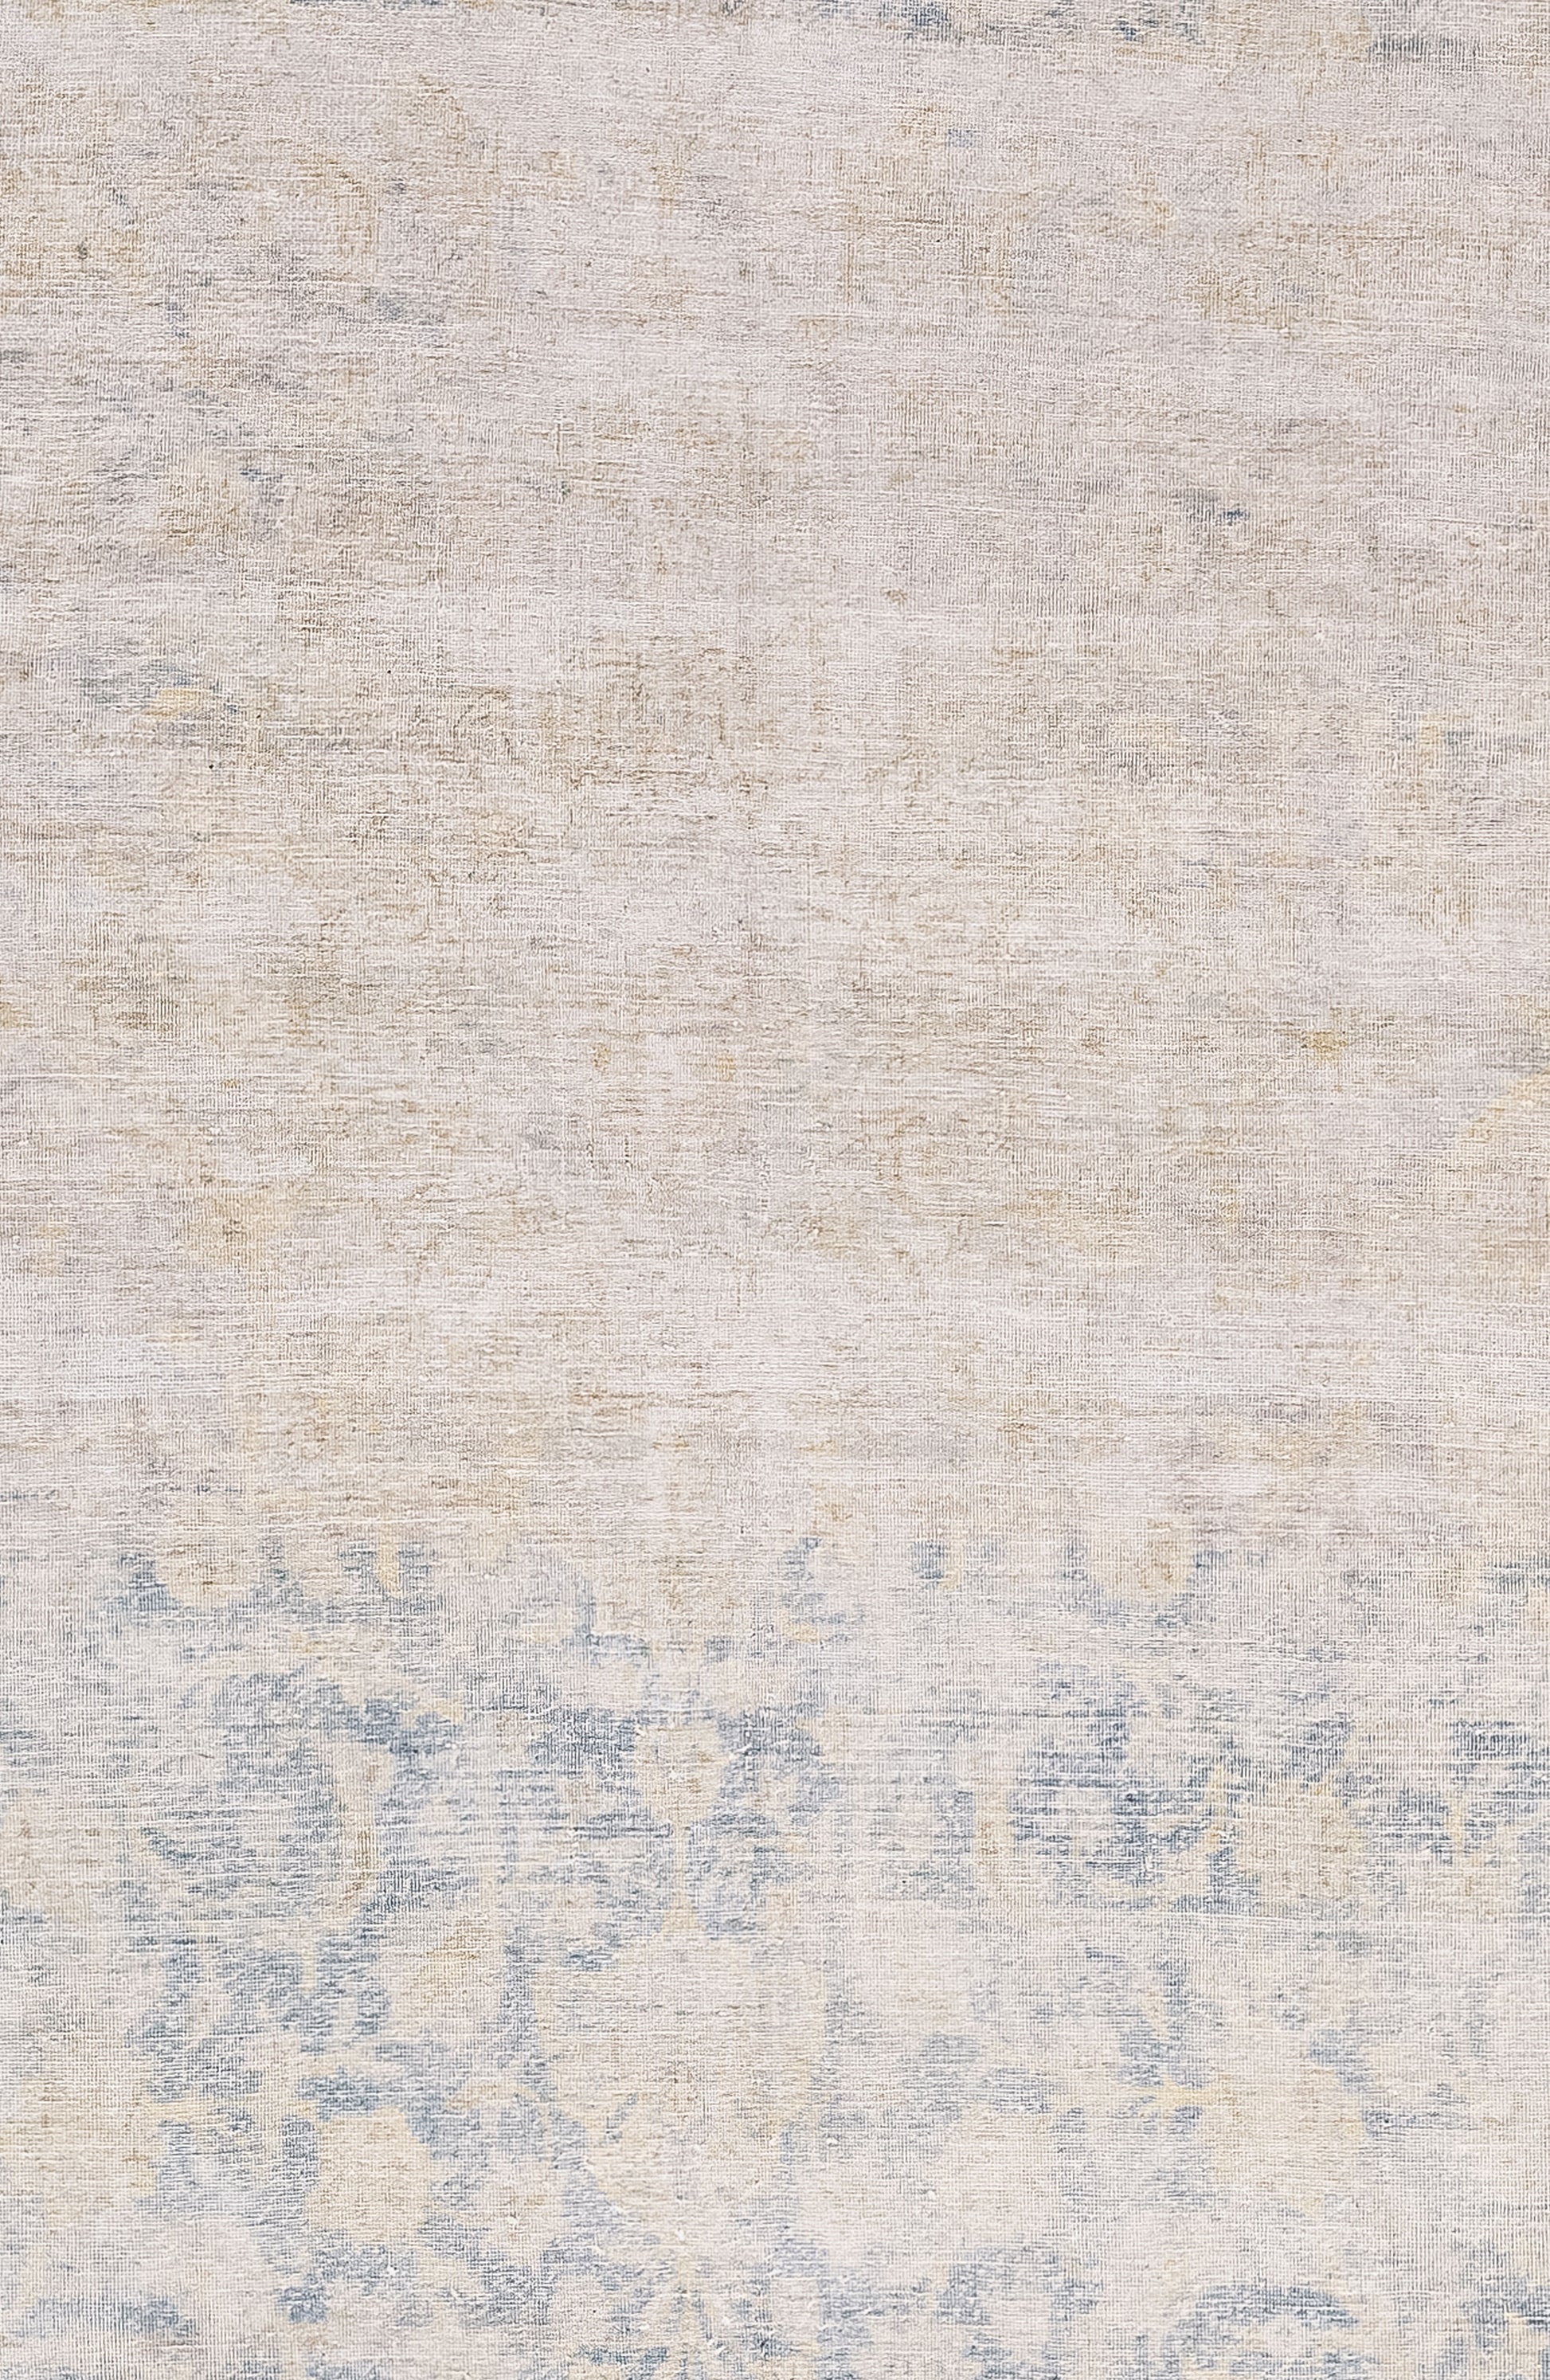 The center of the rug features a distressed beige over a slightly exposed paisley floral print that is on a blue background.